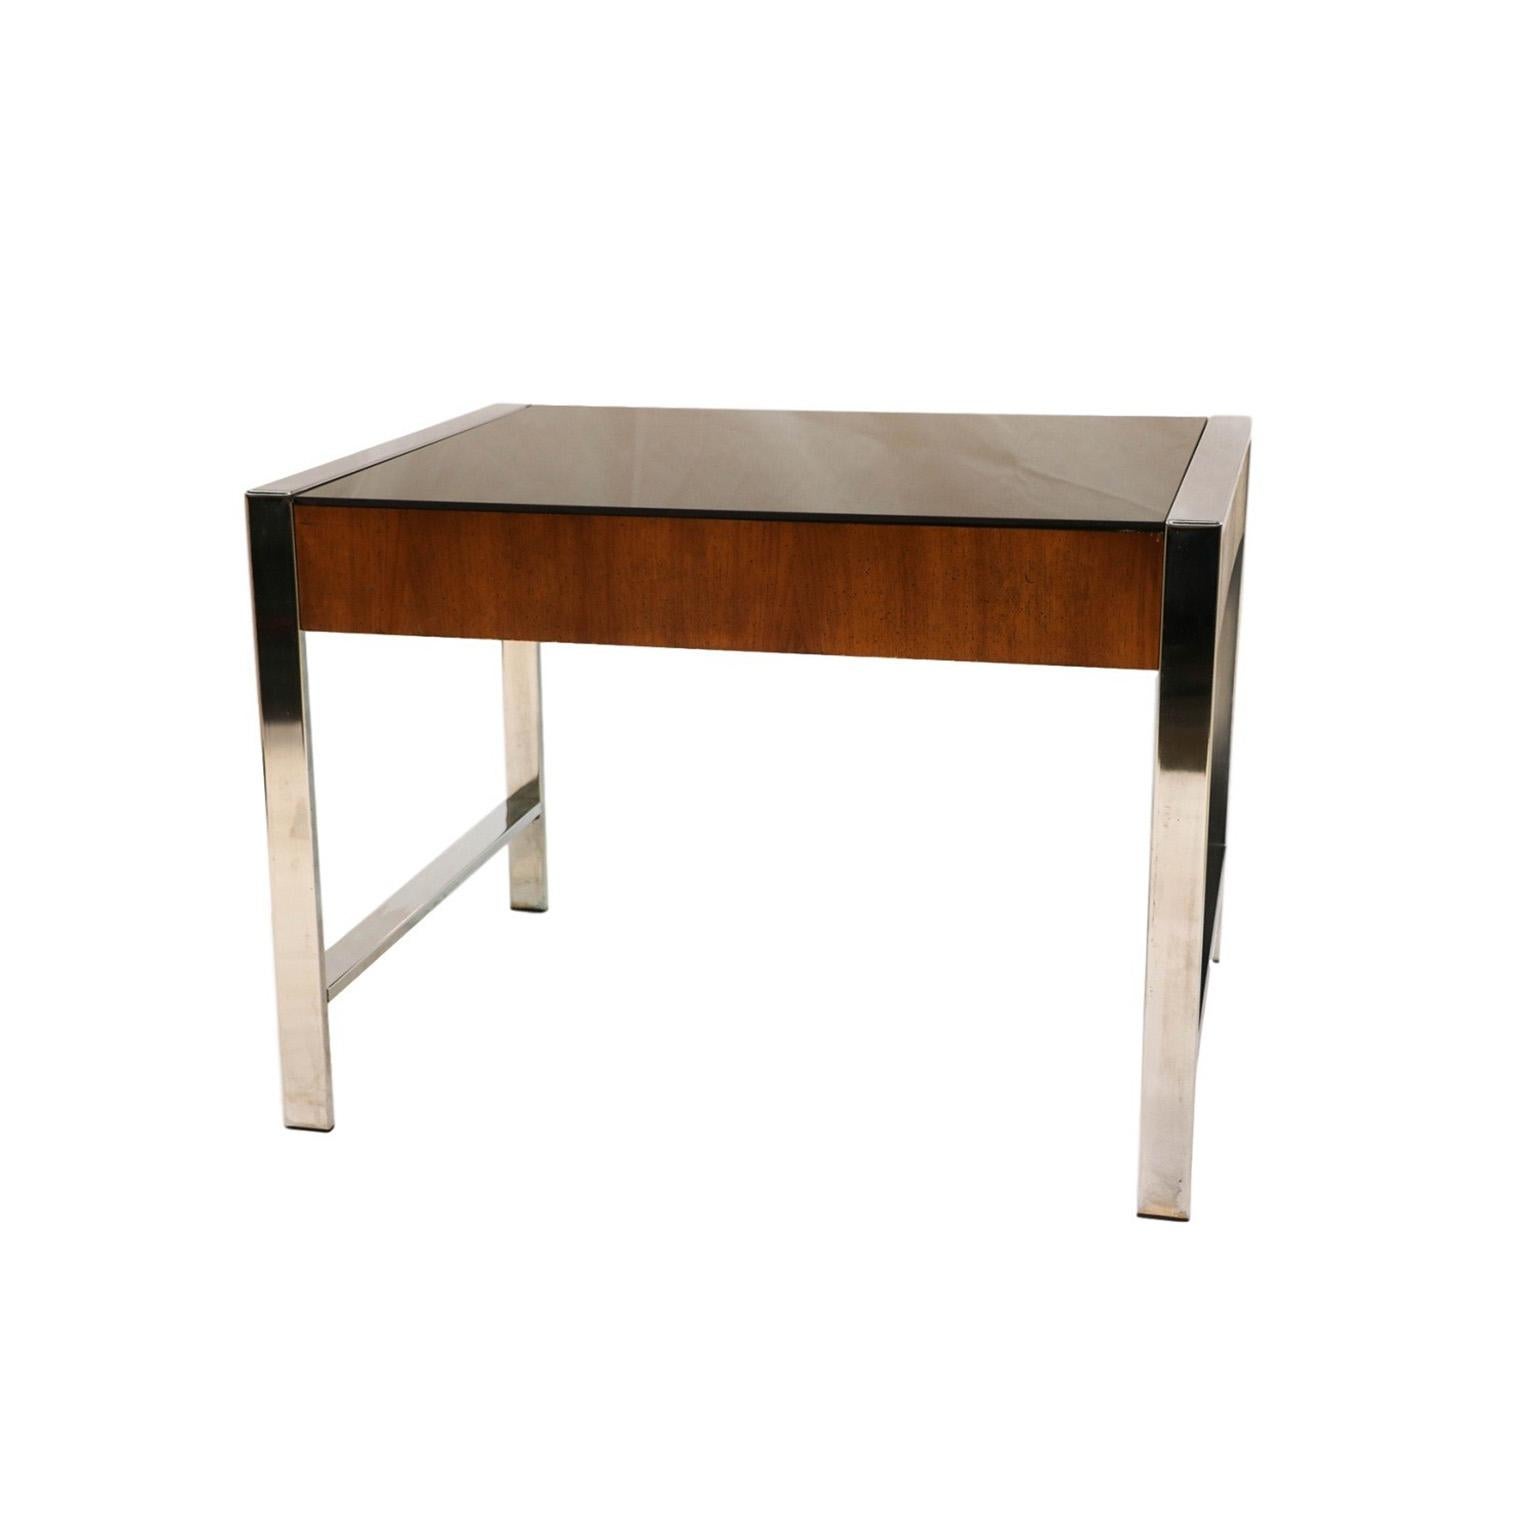 Mid-Century Modern side table and sleek designed in the manner of Milo Baughman. Features mirrored chrome framework with gorgeous warm walnut grain detail fitted with a dark, smoked glass top, very Minimalist, modern aesthetic. Would look great